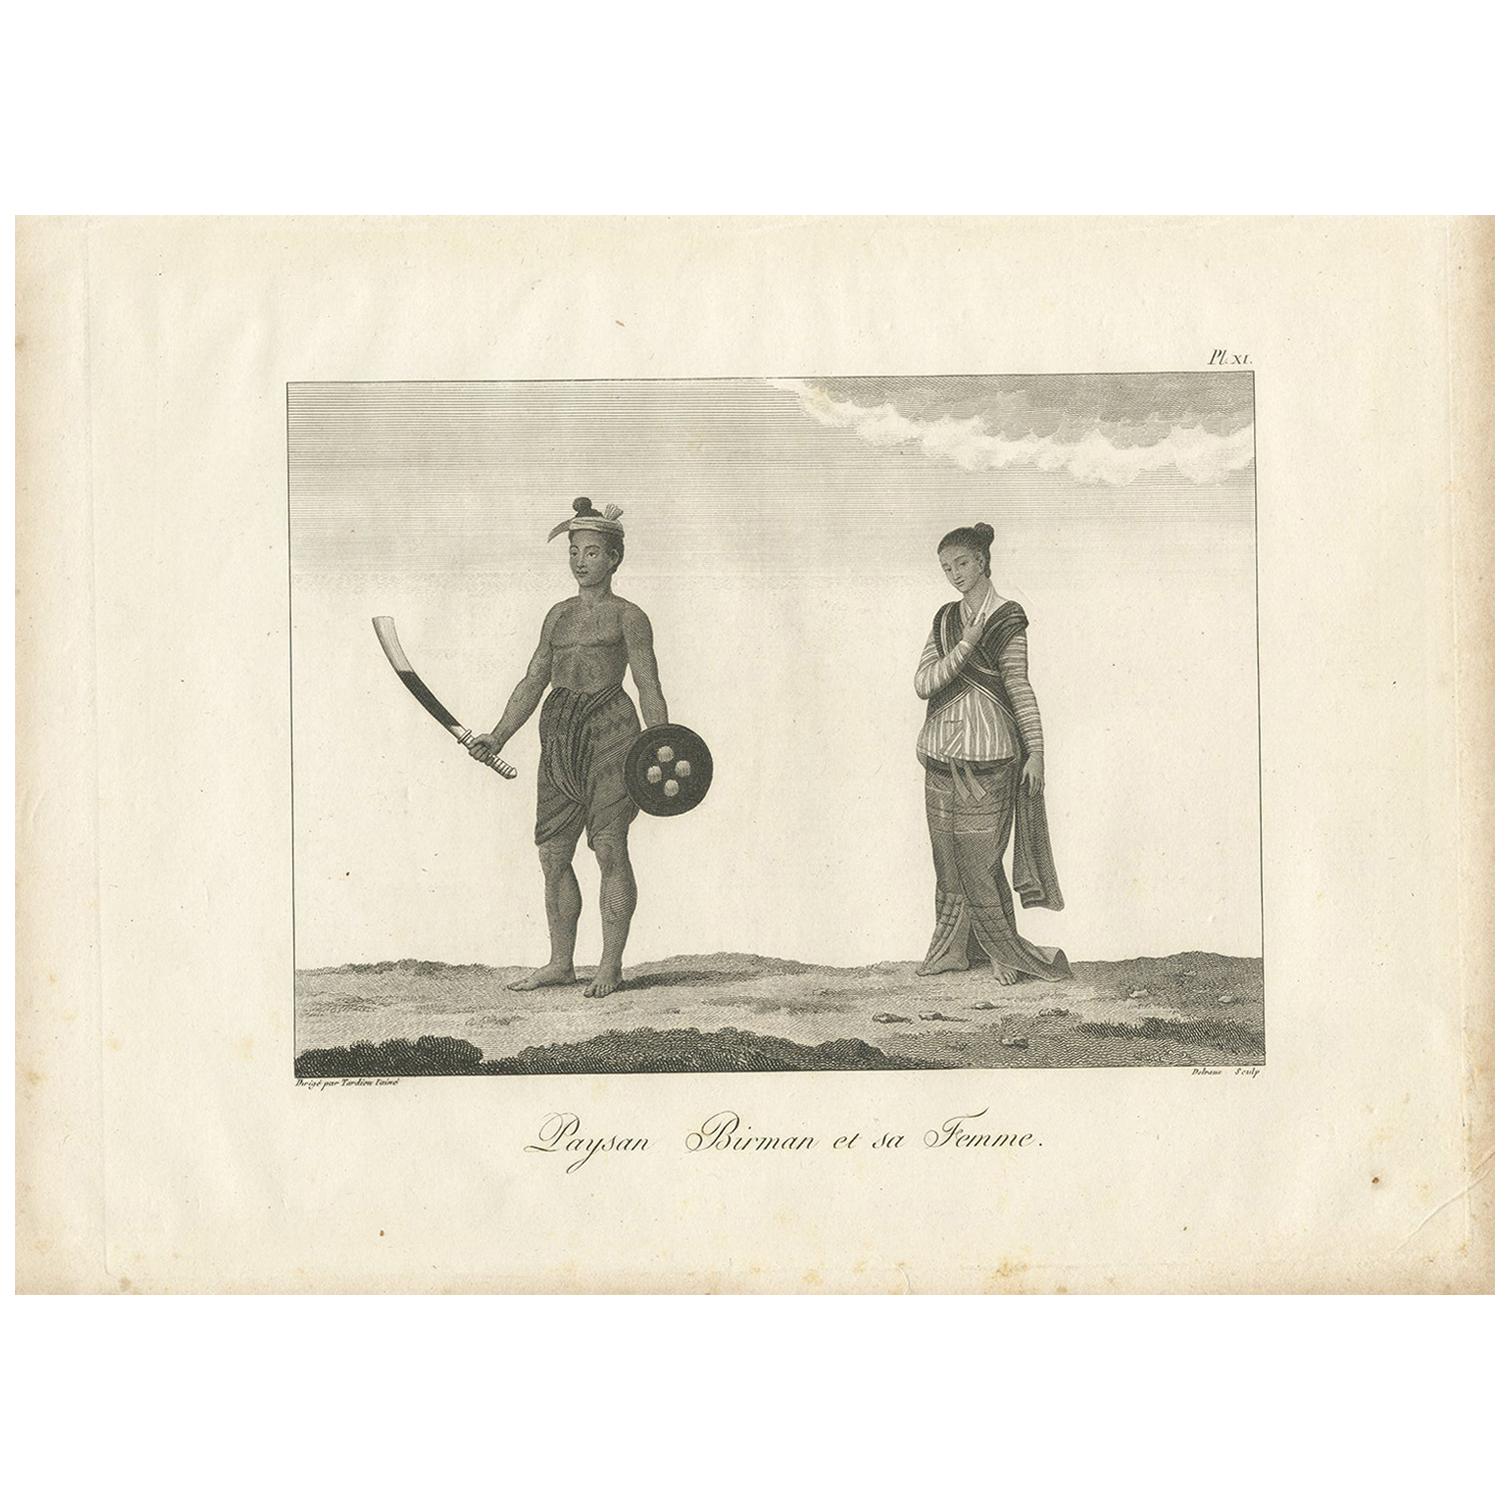 Antique Print of a Burmese Peasant and His Wife by Symes, 1800